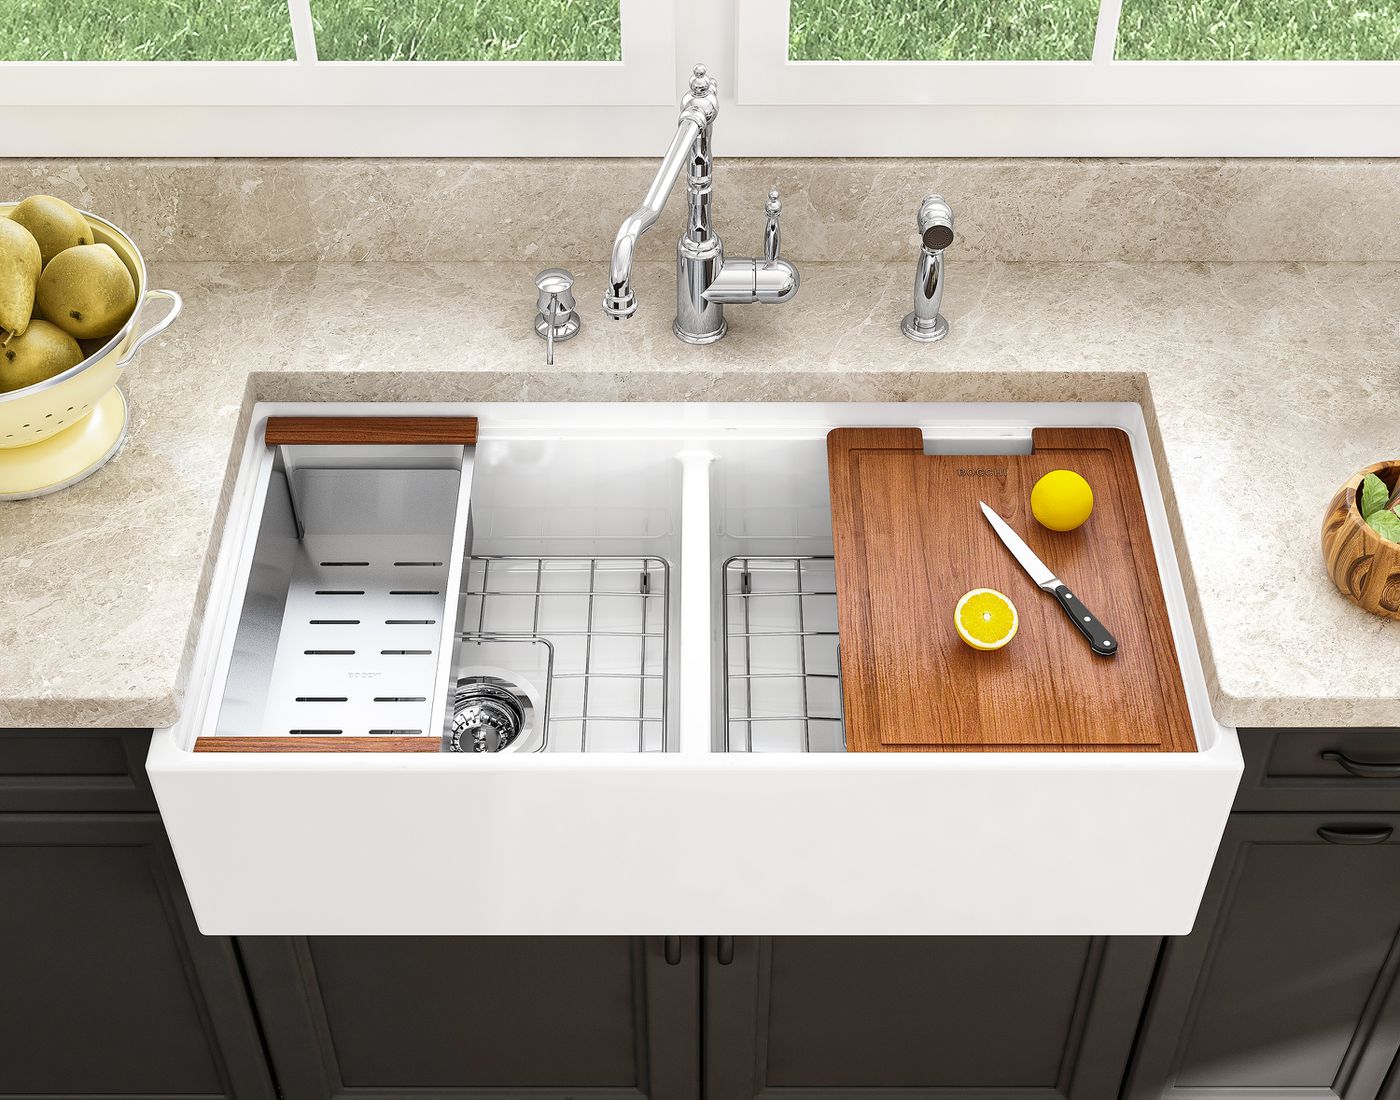 All About Farmhouse Sinks   This Old House